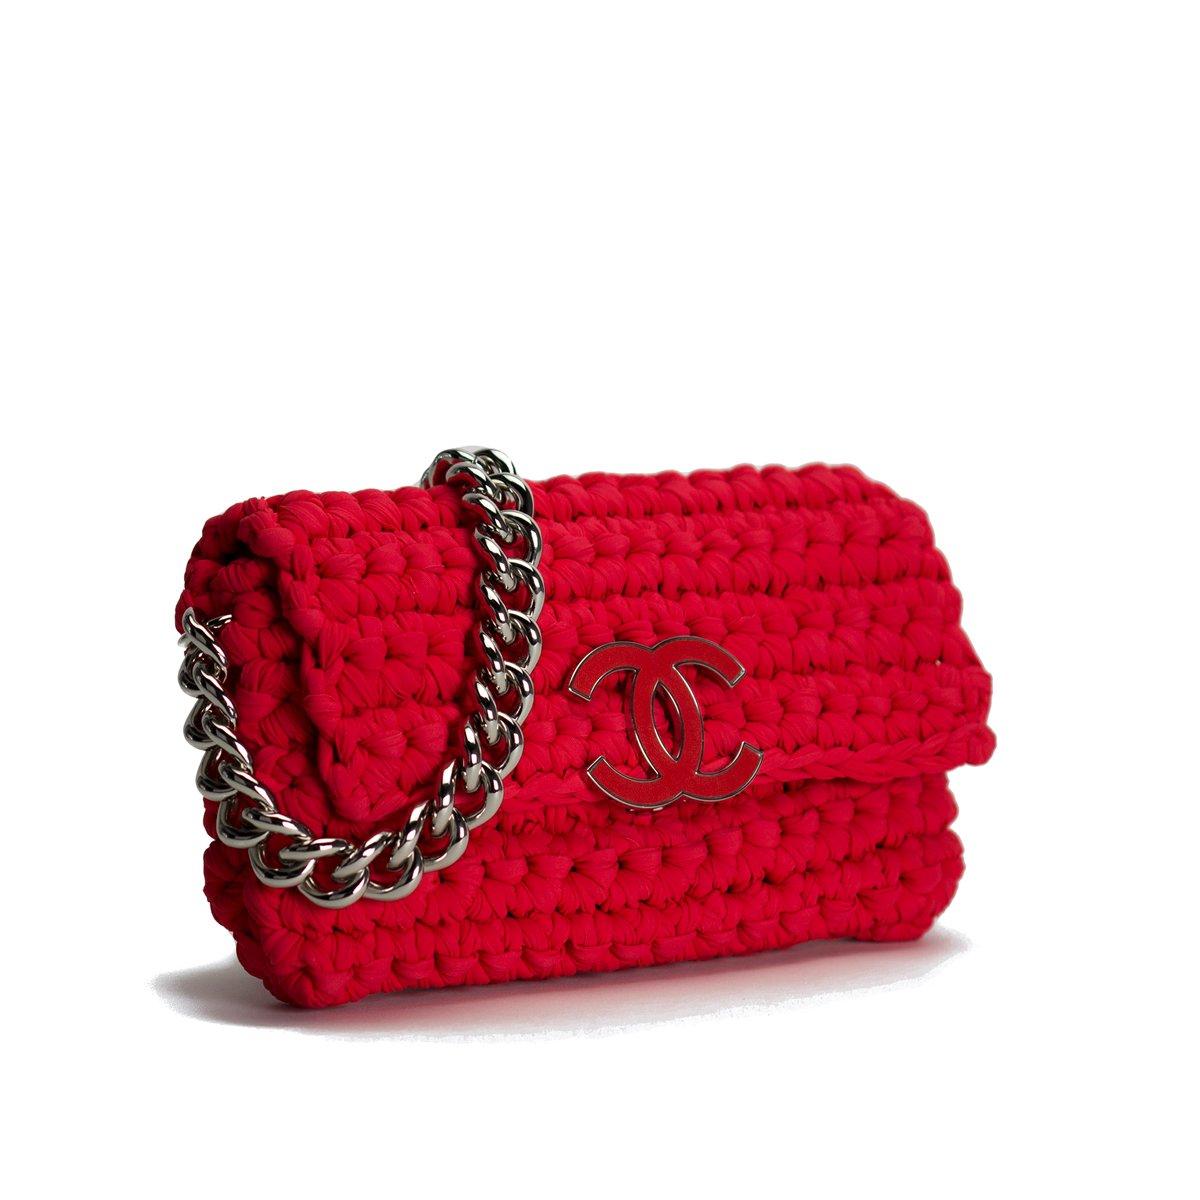 Chanel Red Cruise Crochet Logo Flap Bag In Good Condition For Sale In Miami, FL